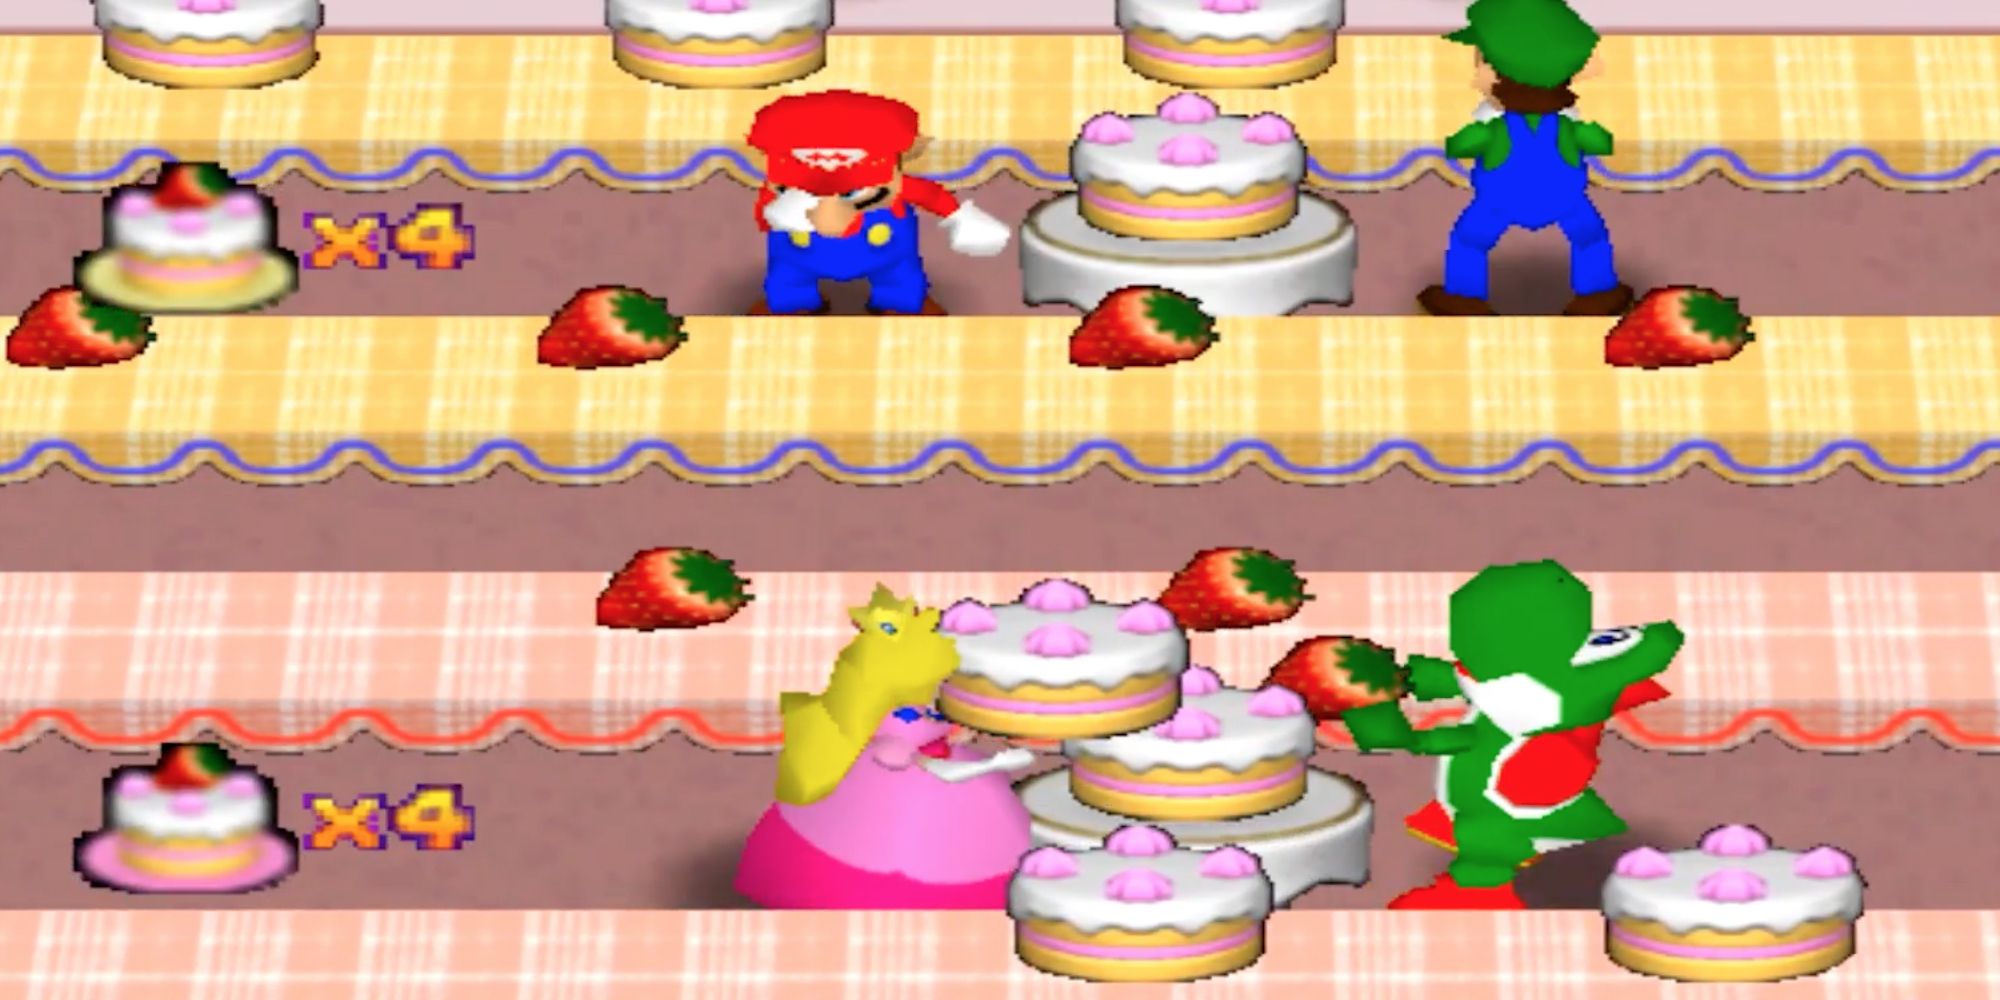 Cake Factory from Mario Party 2, Mario Party: The Top 100 and Mario Party Superstars.